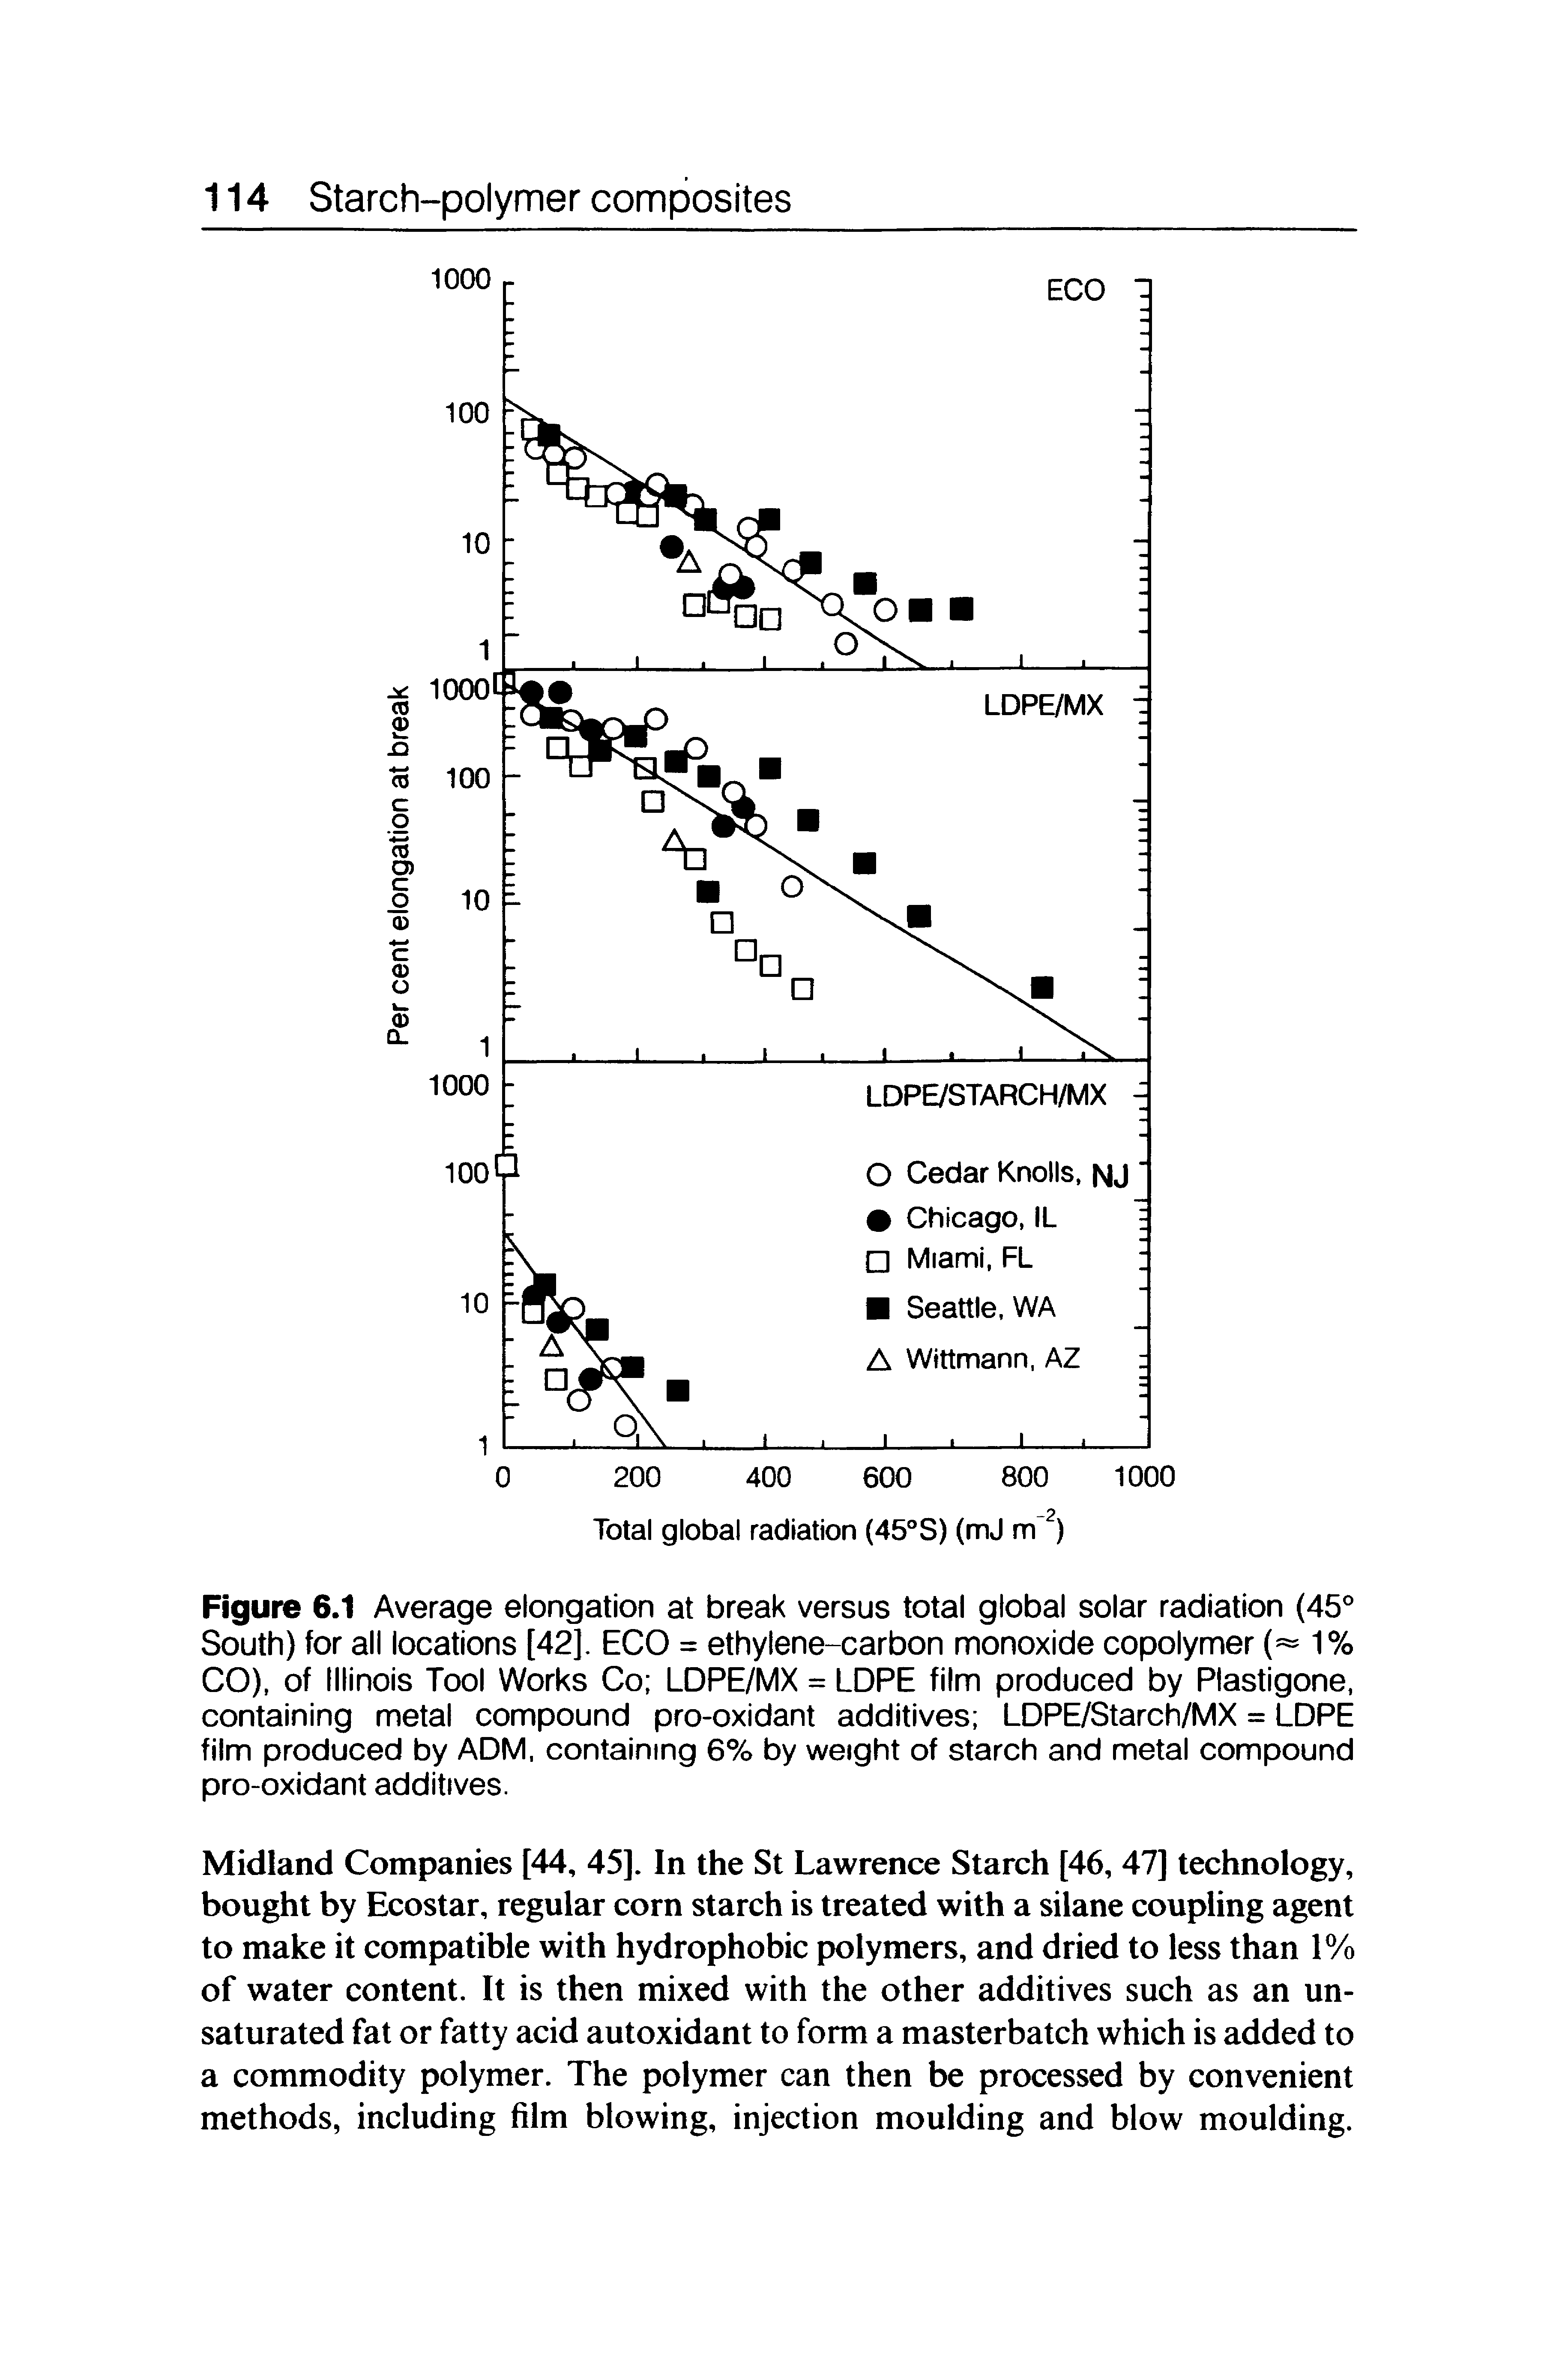 Figure 6.1 Average elongation at break versus total global solar radiation (45° South) for all locations [42], ECO = ethylene-carbon monoxide copolymer ( 1% CO), of Illinois Tool Works Co LDPE/MX = LDPE film produced by Plastigone, containing metal compound pro-oxidant additives LDPE/Starch/MX = LDPE film produced by ADM. containing 6% by weight of starch and metal compound pro-oxidant additives.